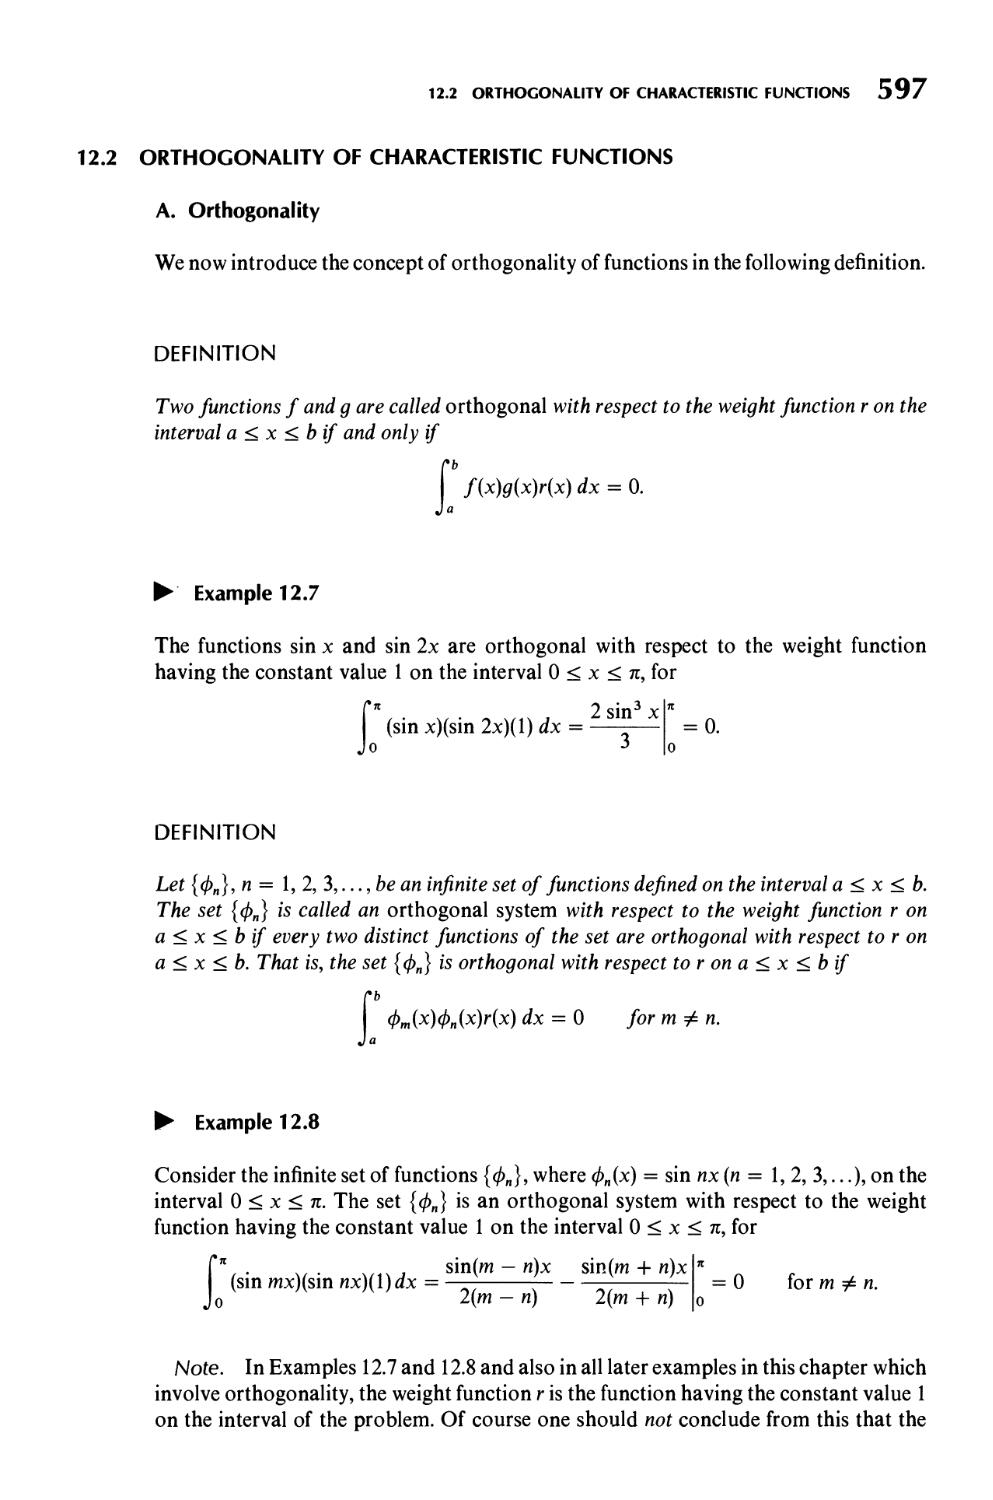 12.2  Orthogonality of Characteristic Functions